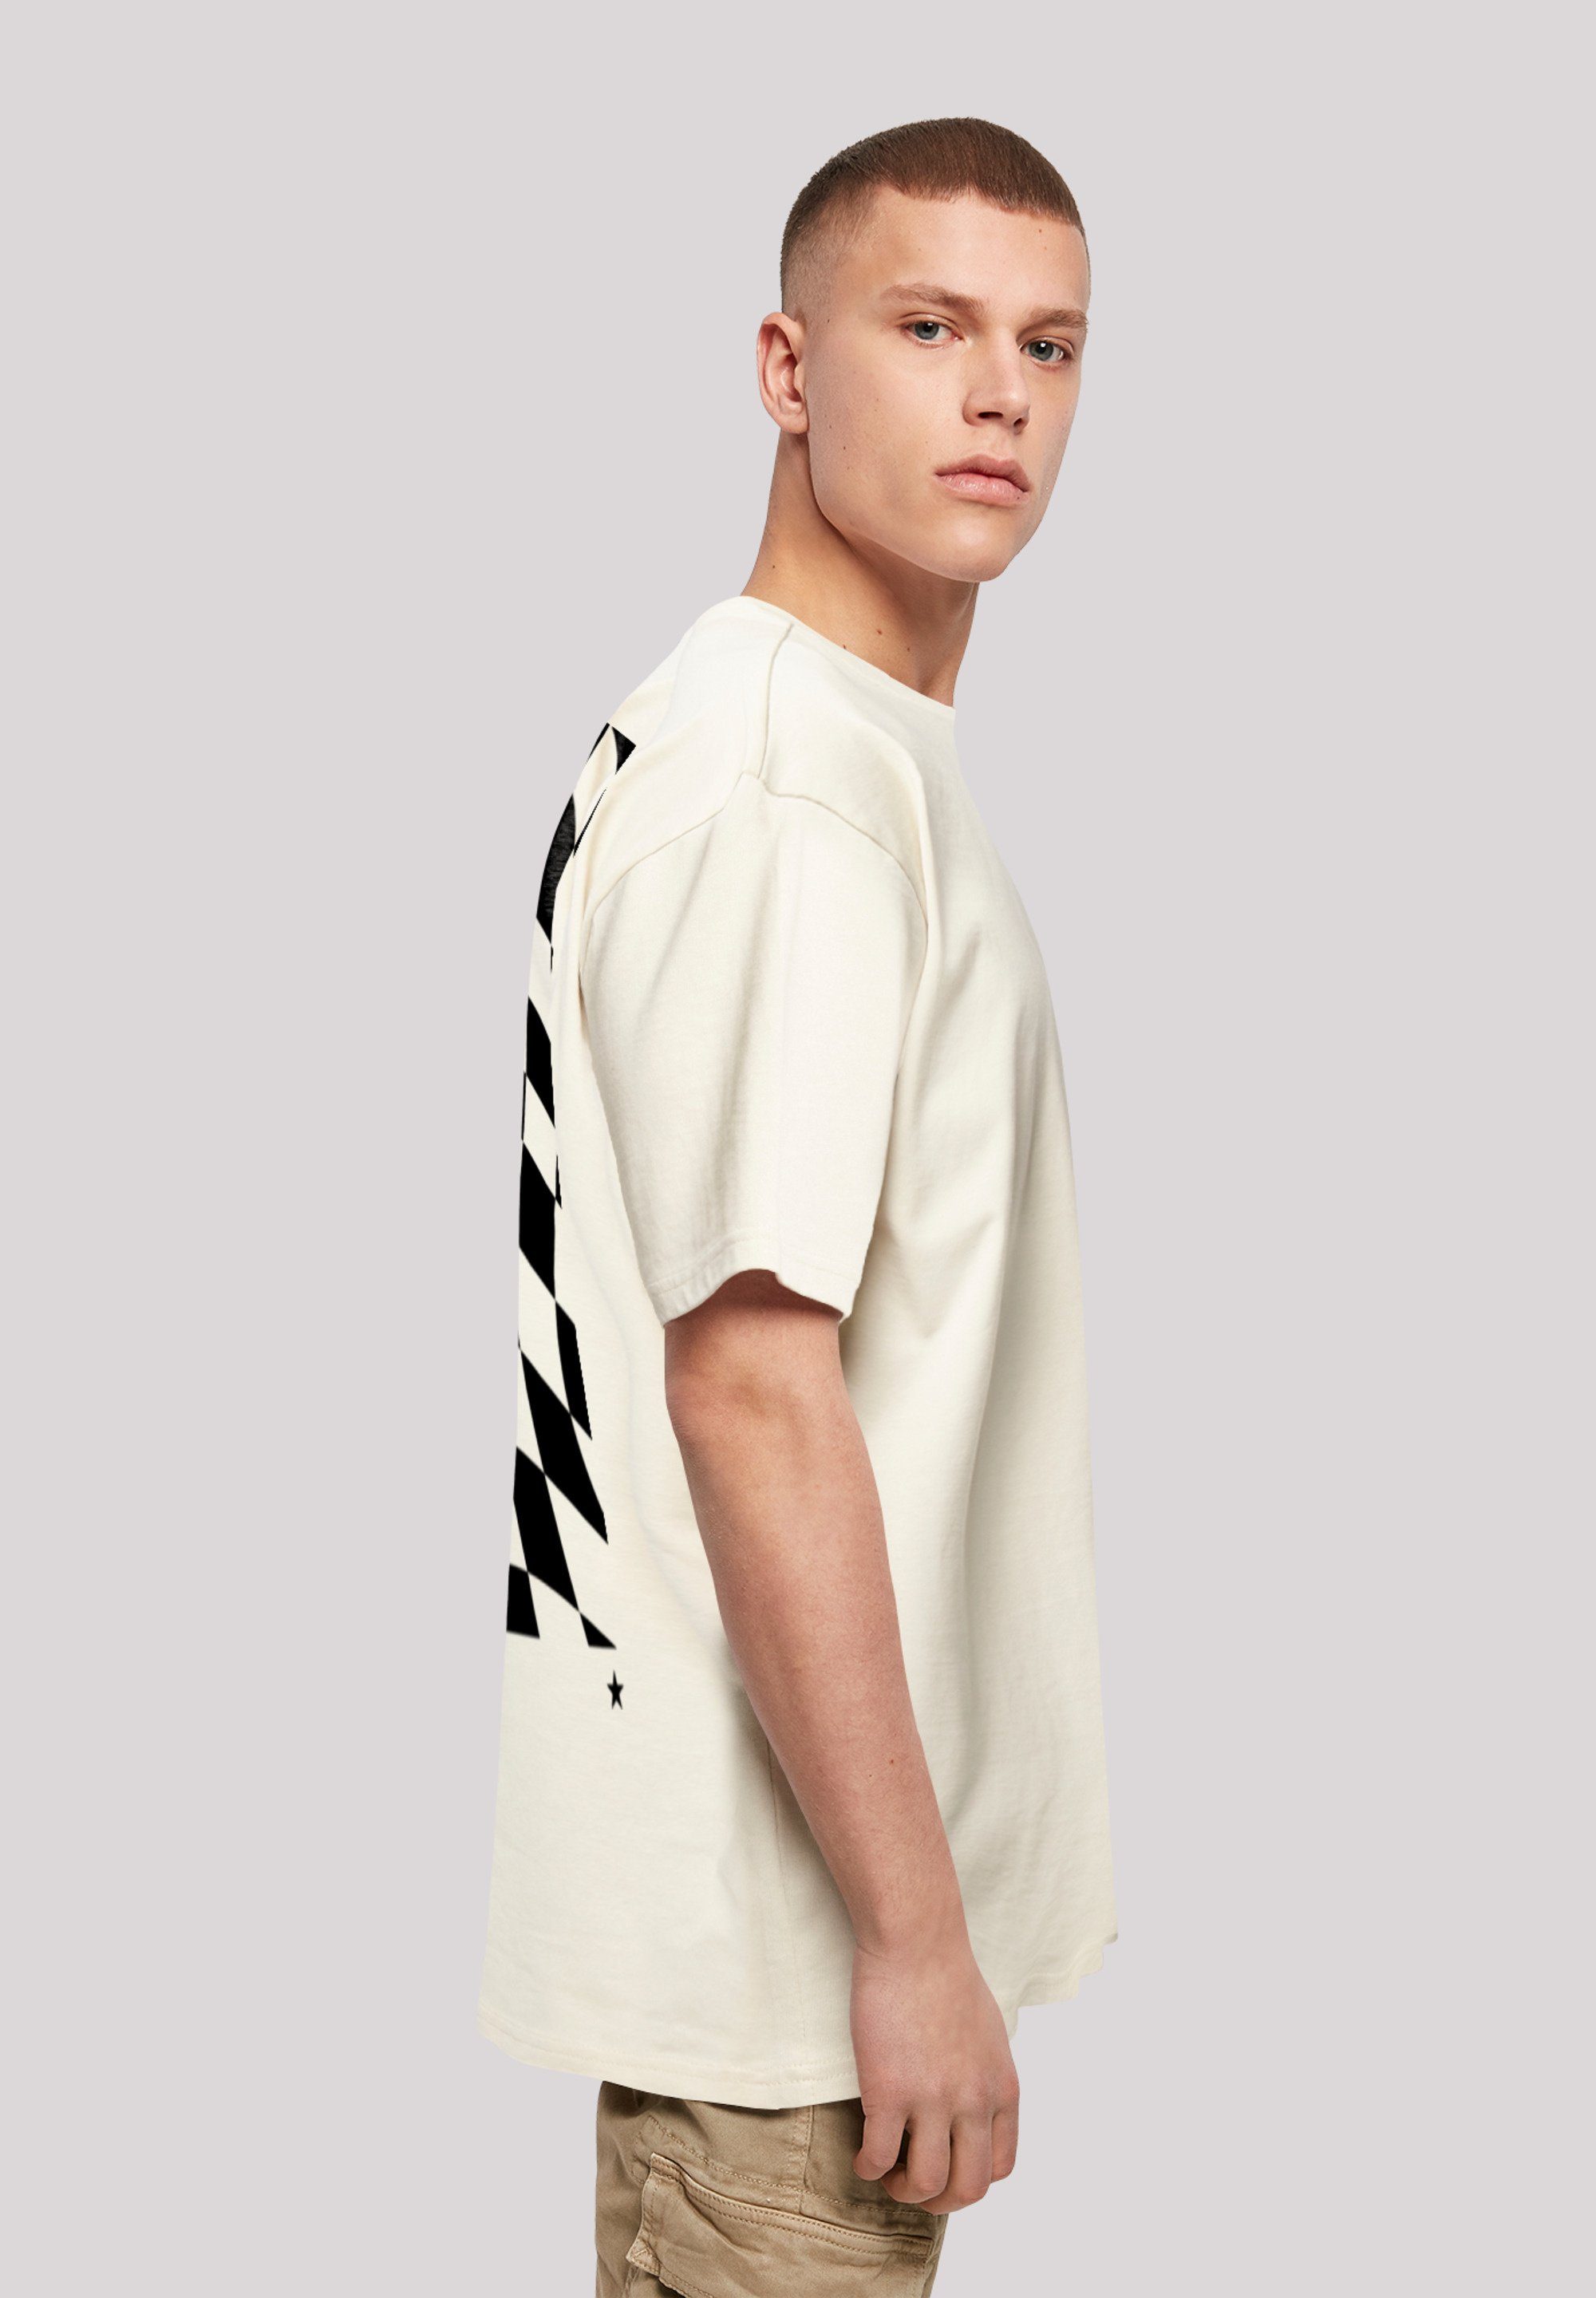 F4NT4STIC T-Shirt Wavy Schach Print Muster sand